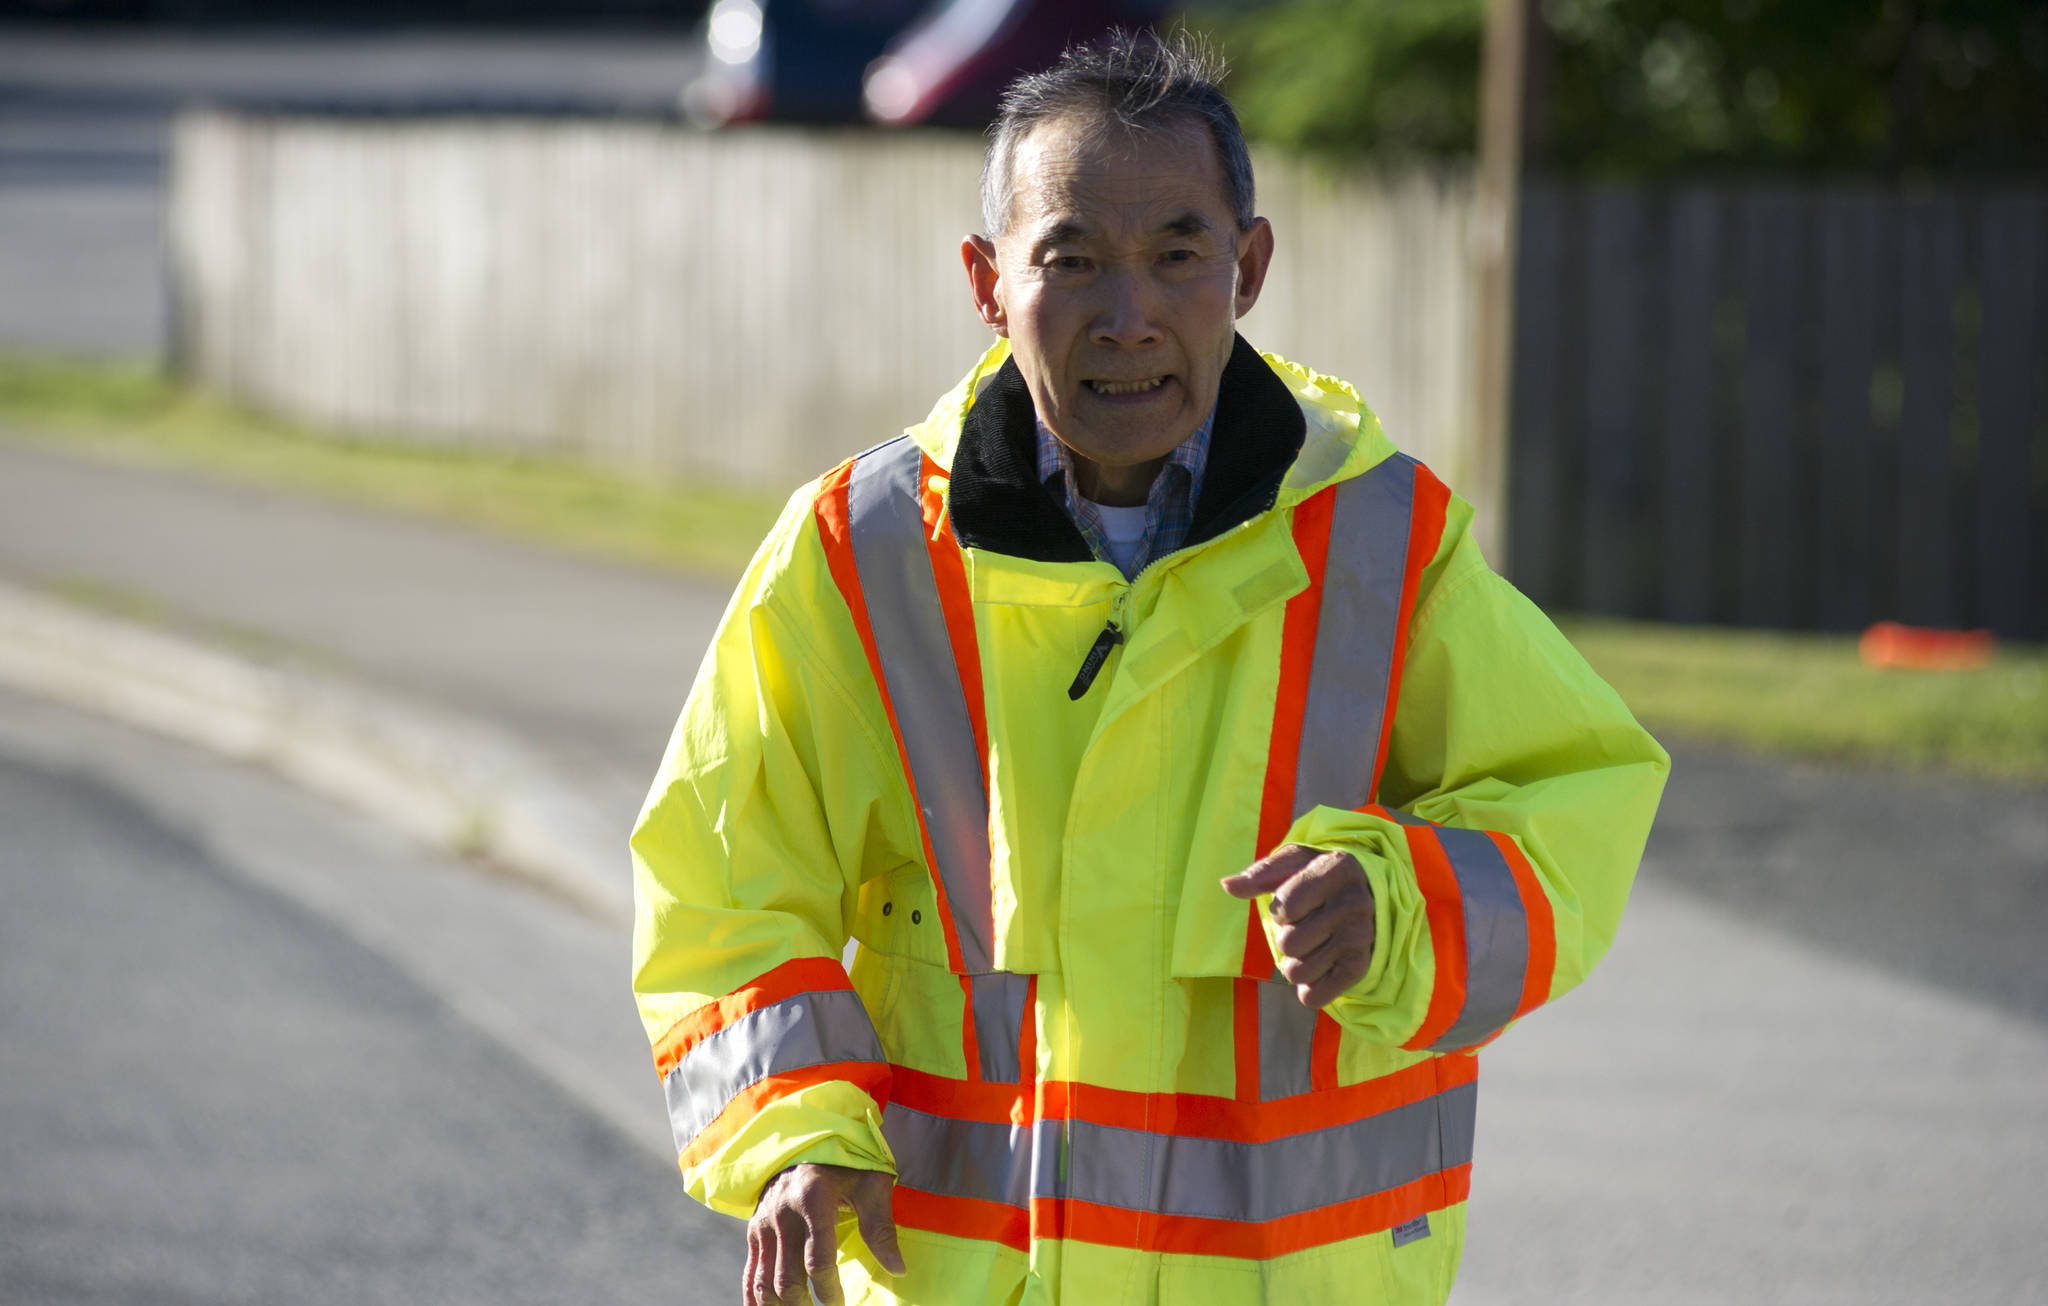 Richard “Dick” Goto, 75, finishes his 2-mile run on James Boulevard in the Mendenhall Valley on Friday. (Nolin Ainsworth | Juneau Empire)